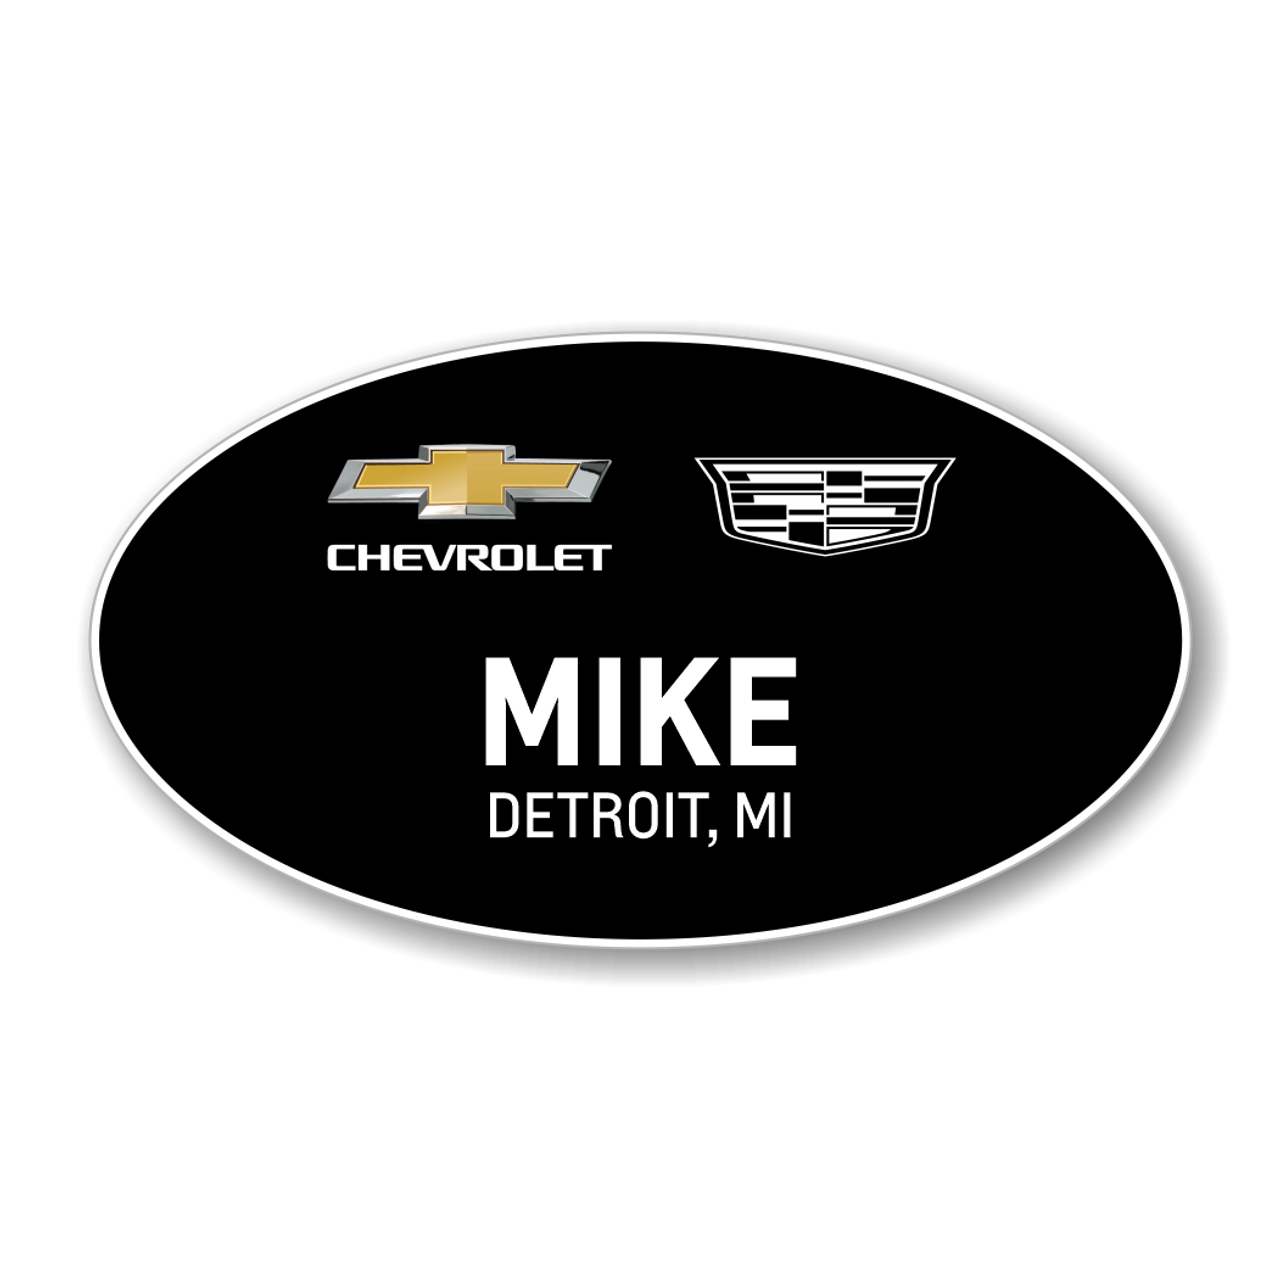 Chevrolet Cadillac Black Oval Name Badge Current Logos